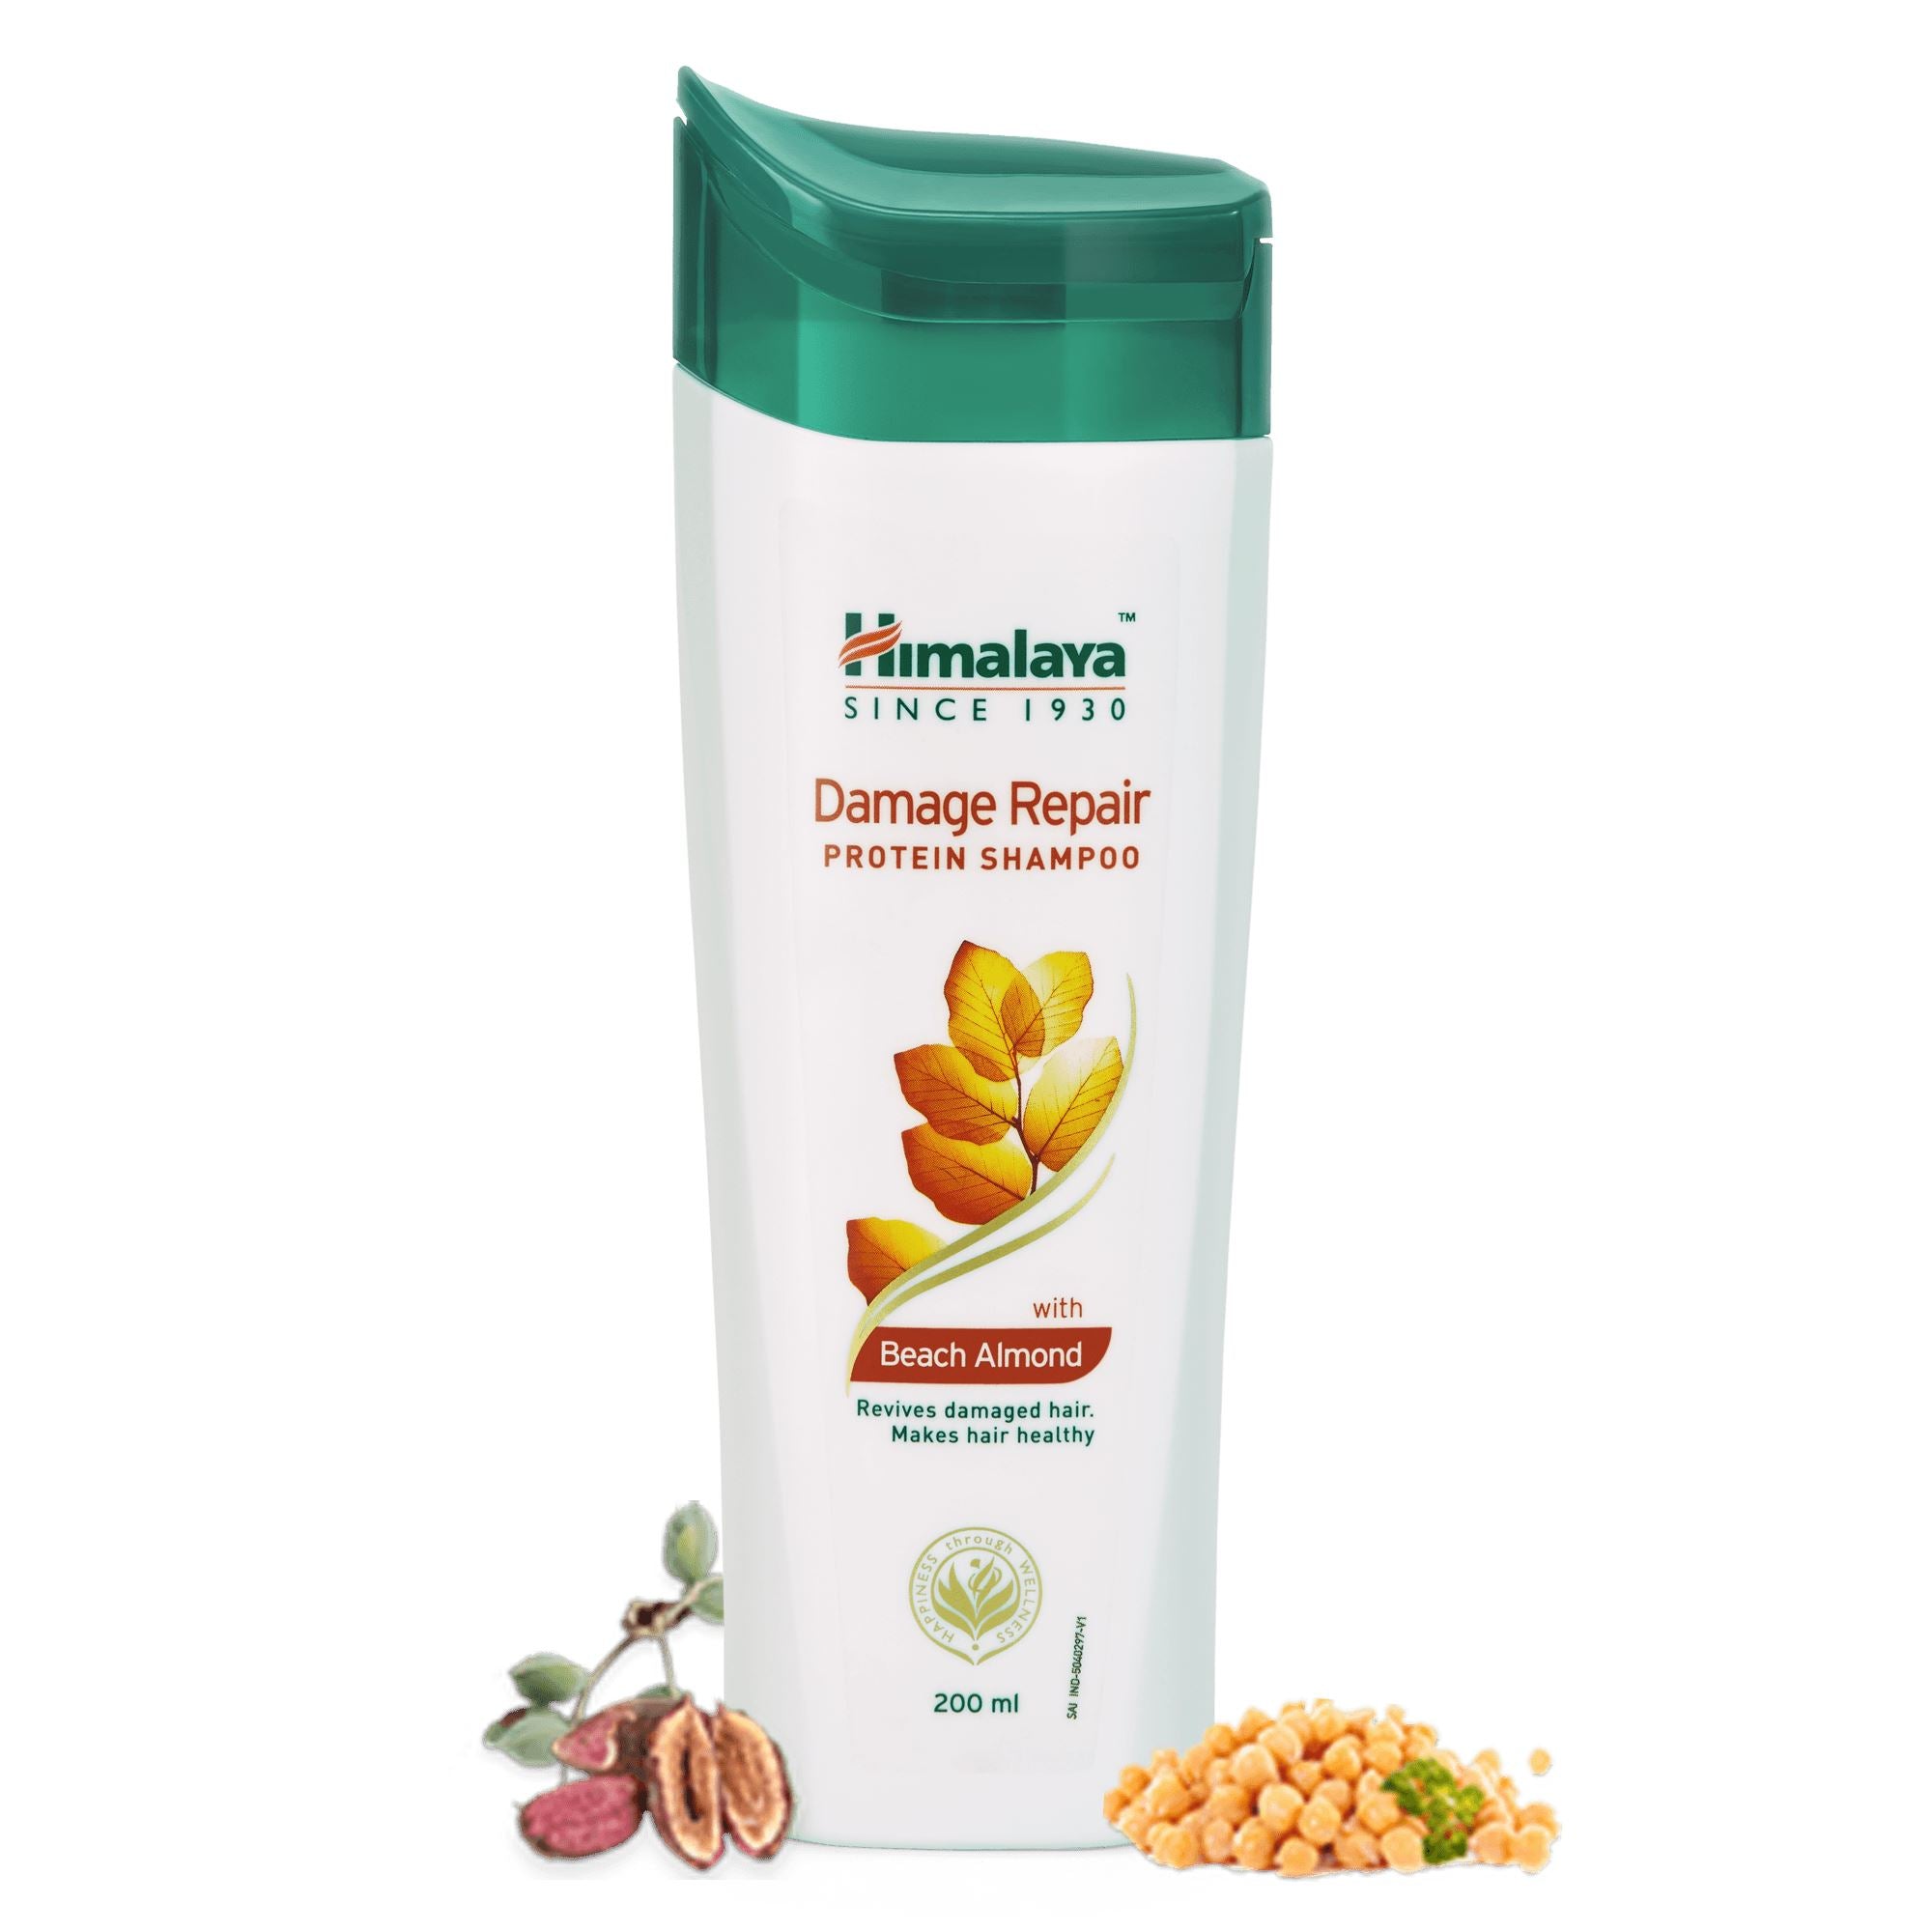 Himalaya Damage Repair Protein Shampoo 200ml - For dry, frizzy and damaged hair